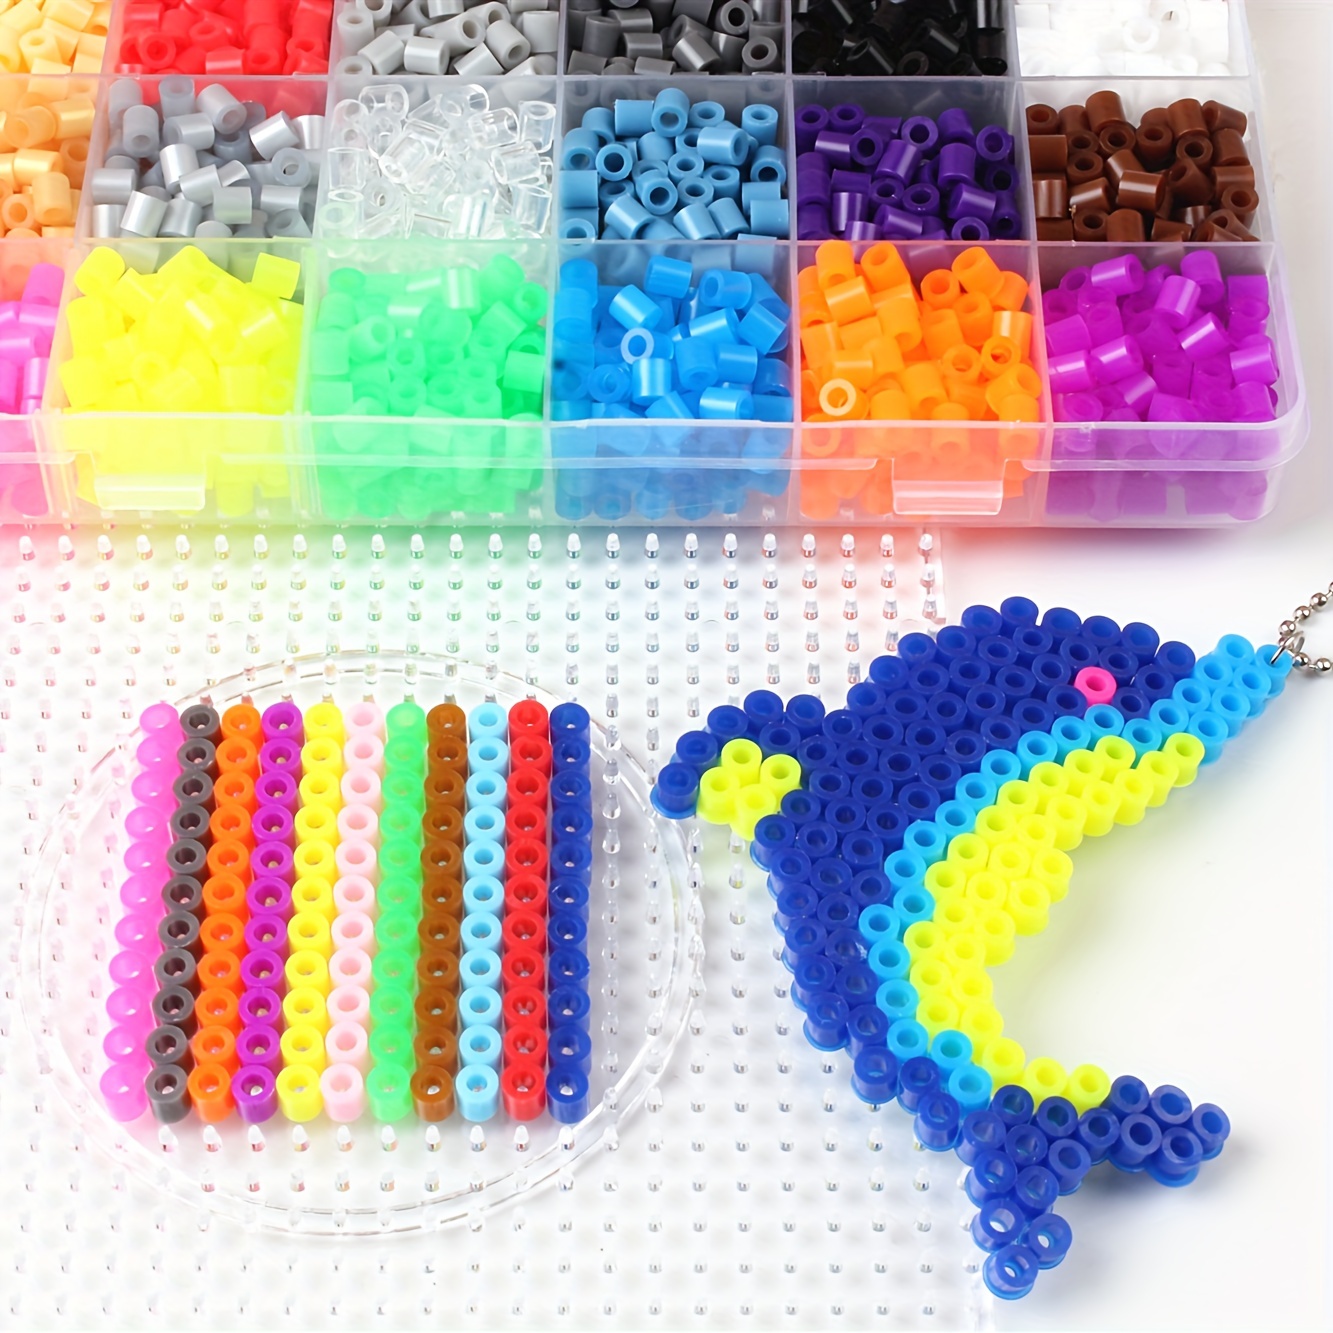 5mm Beads 1000pcs transparent Iron Beads for Kids Hama Beads Diy Pixel  Puzzles High Quality Handmade Gift Toy - Realistic Reborn Dolls for Sale